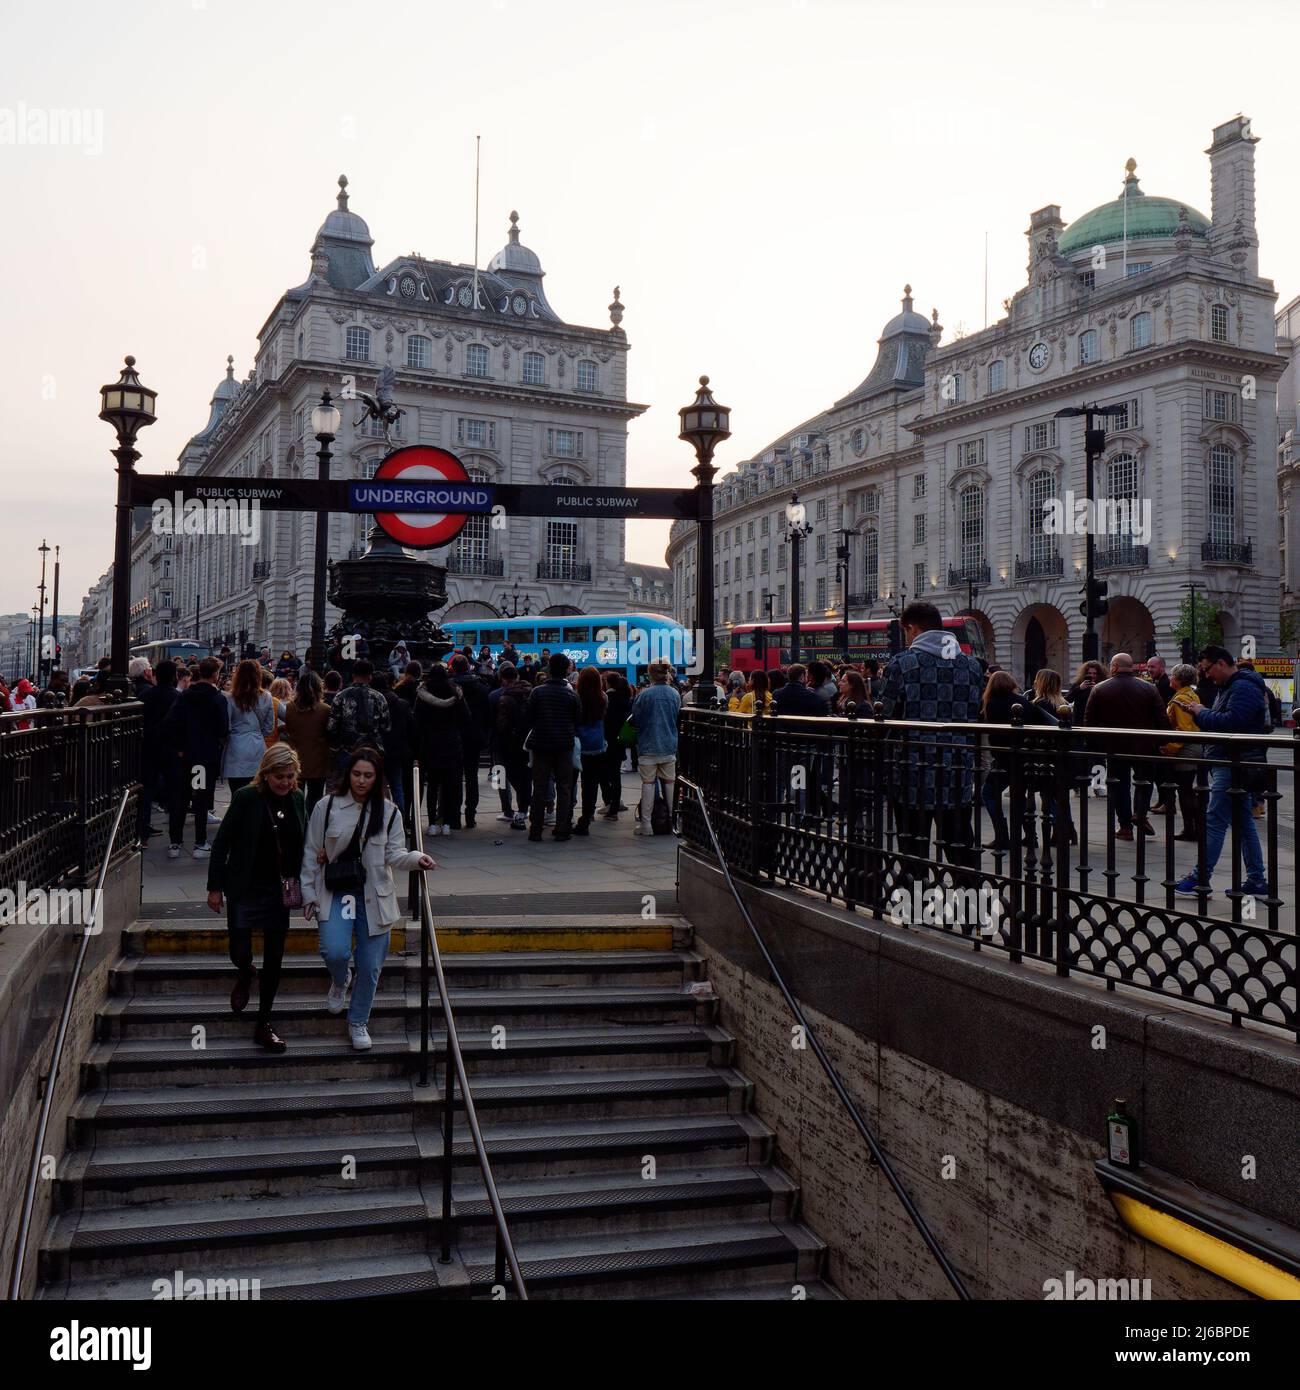 London, Greater London, England, April 23 2022: Piccadilly Circus as seen from the tube station as crowds gather to watch a street act and a red and b Stock Photo